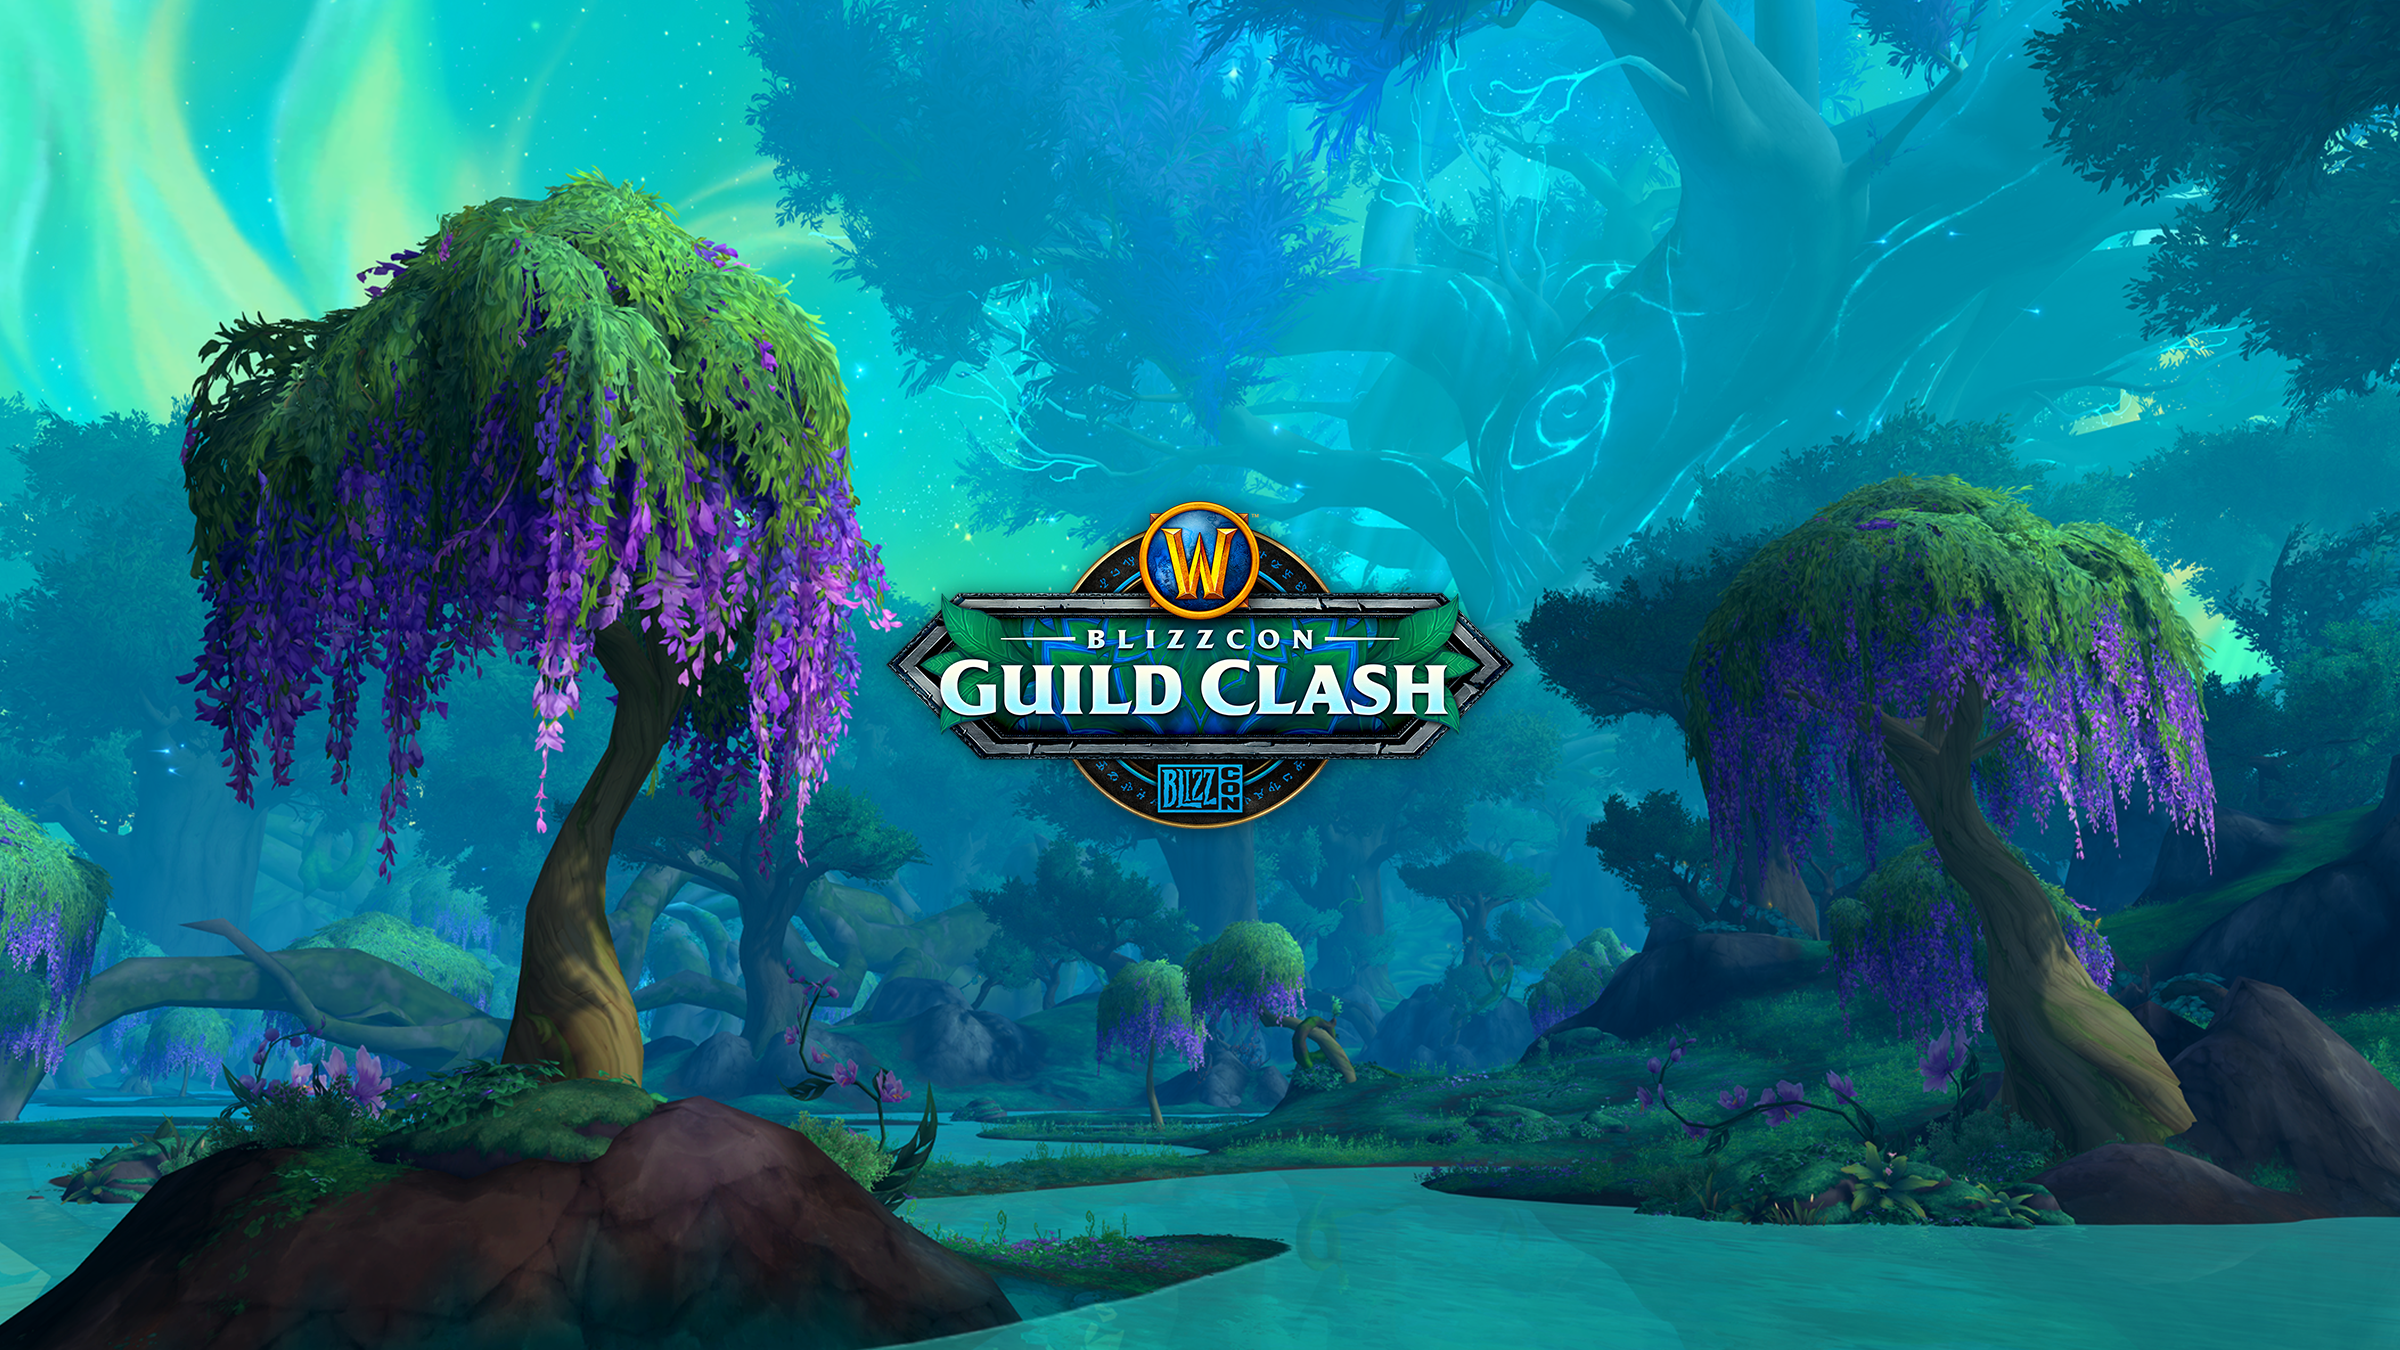 Introducing the World of Warcraft® BlizzCon Guild Clash!